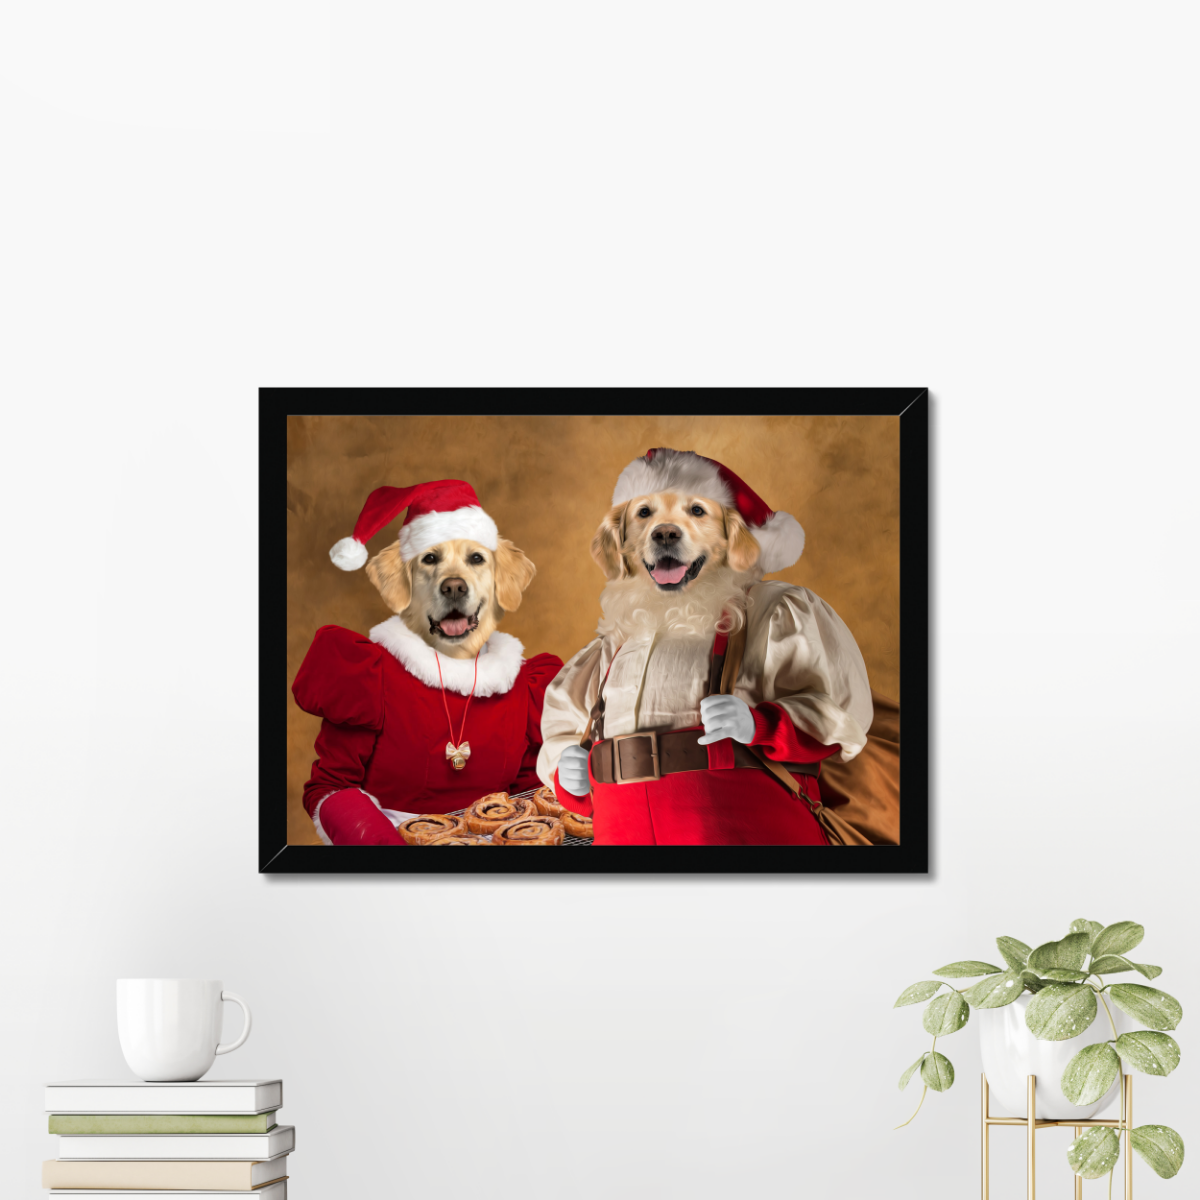 Mr & Mrs Claus: Custom Pet Portrait - Paw & Glory, paw and glory, the admiral dog portrait, pet photo clothing, best dog paintings, cat picture painting, dog and couple portrait, pictures for pets, pet portrait